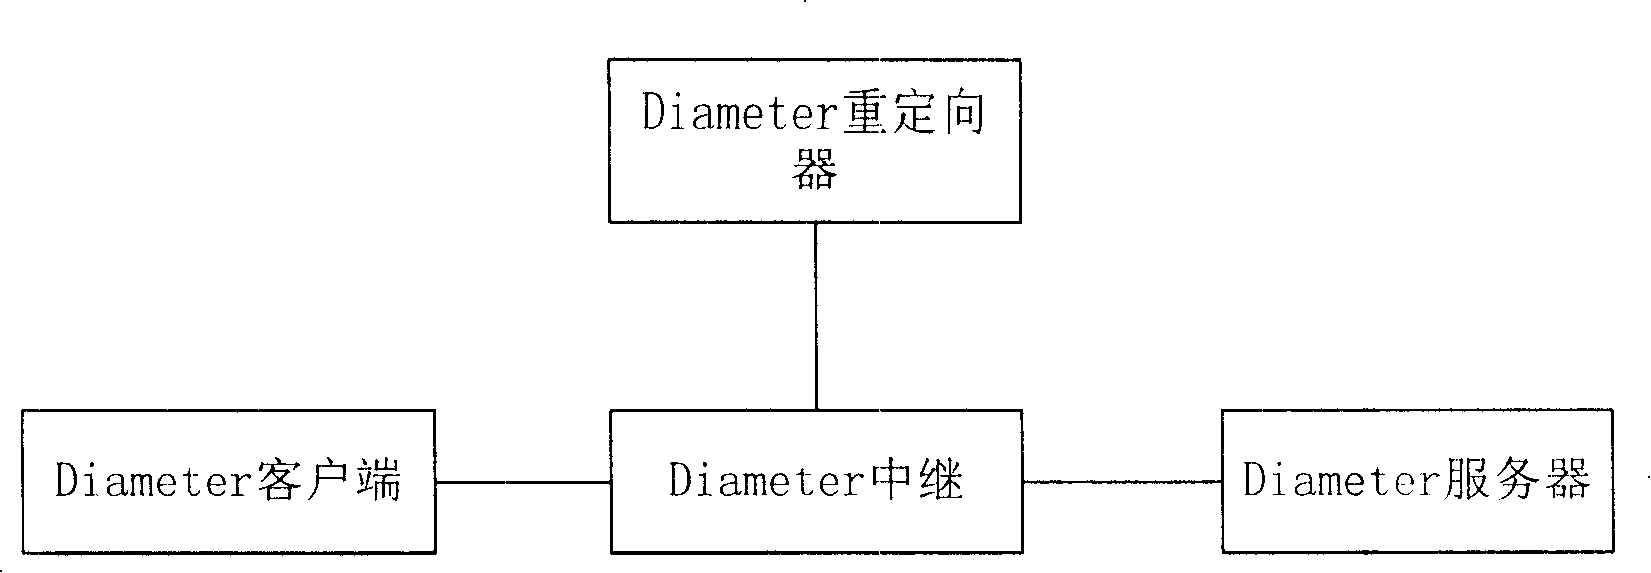 Redirector, relay and route information configuration system and update method